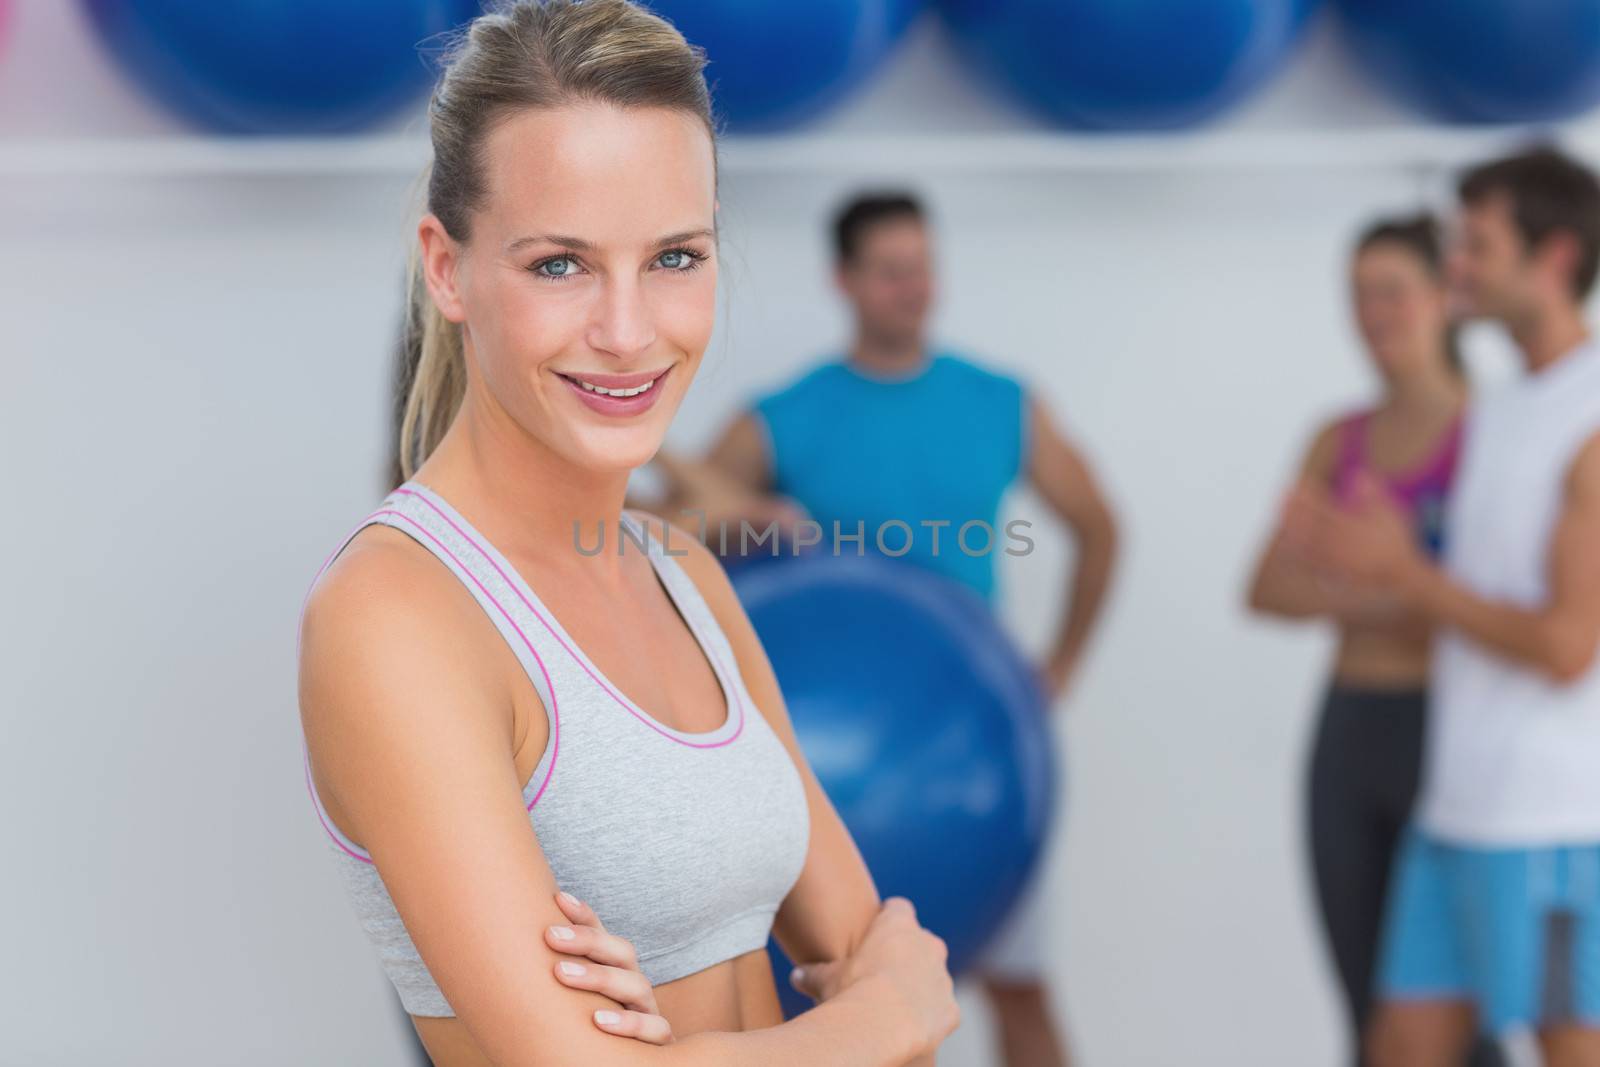 Smiling woman with friends in background at fitness studio by Wavebreakmedia